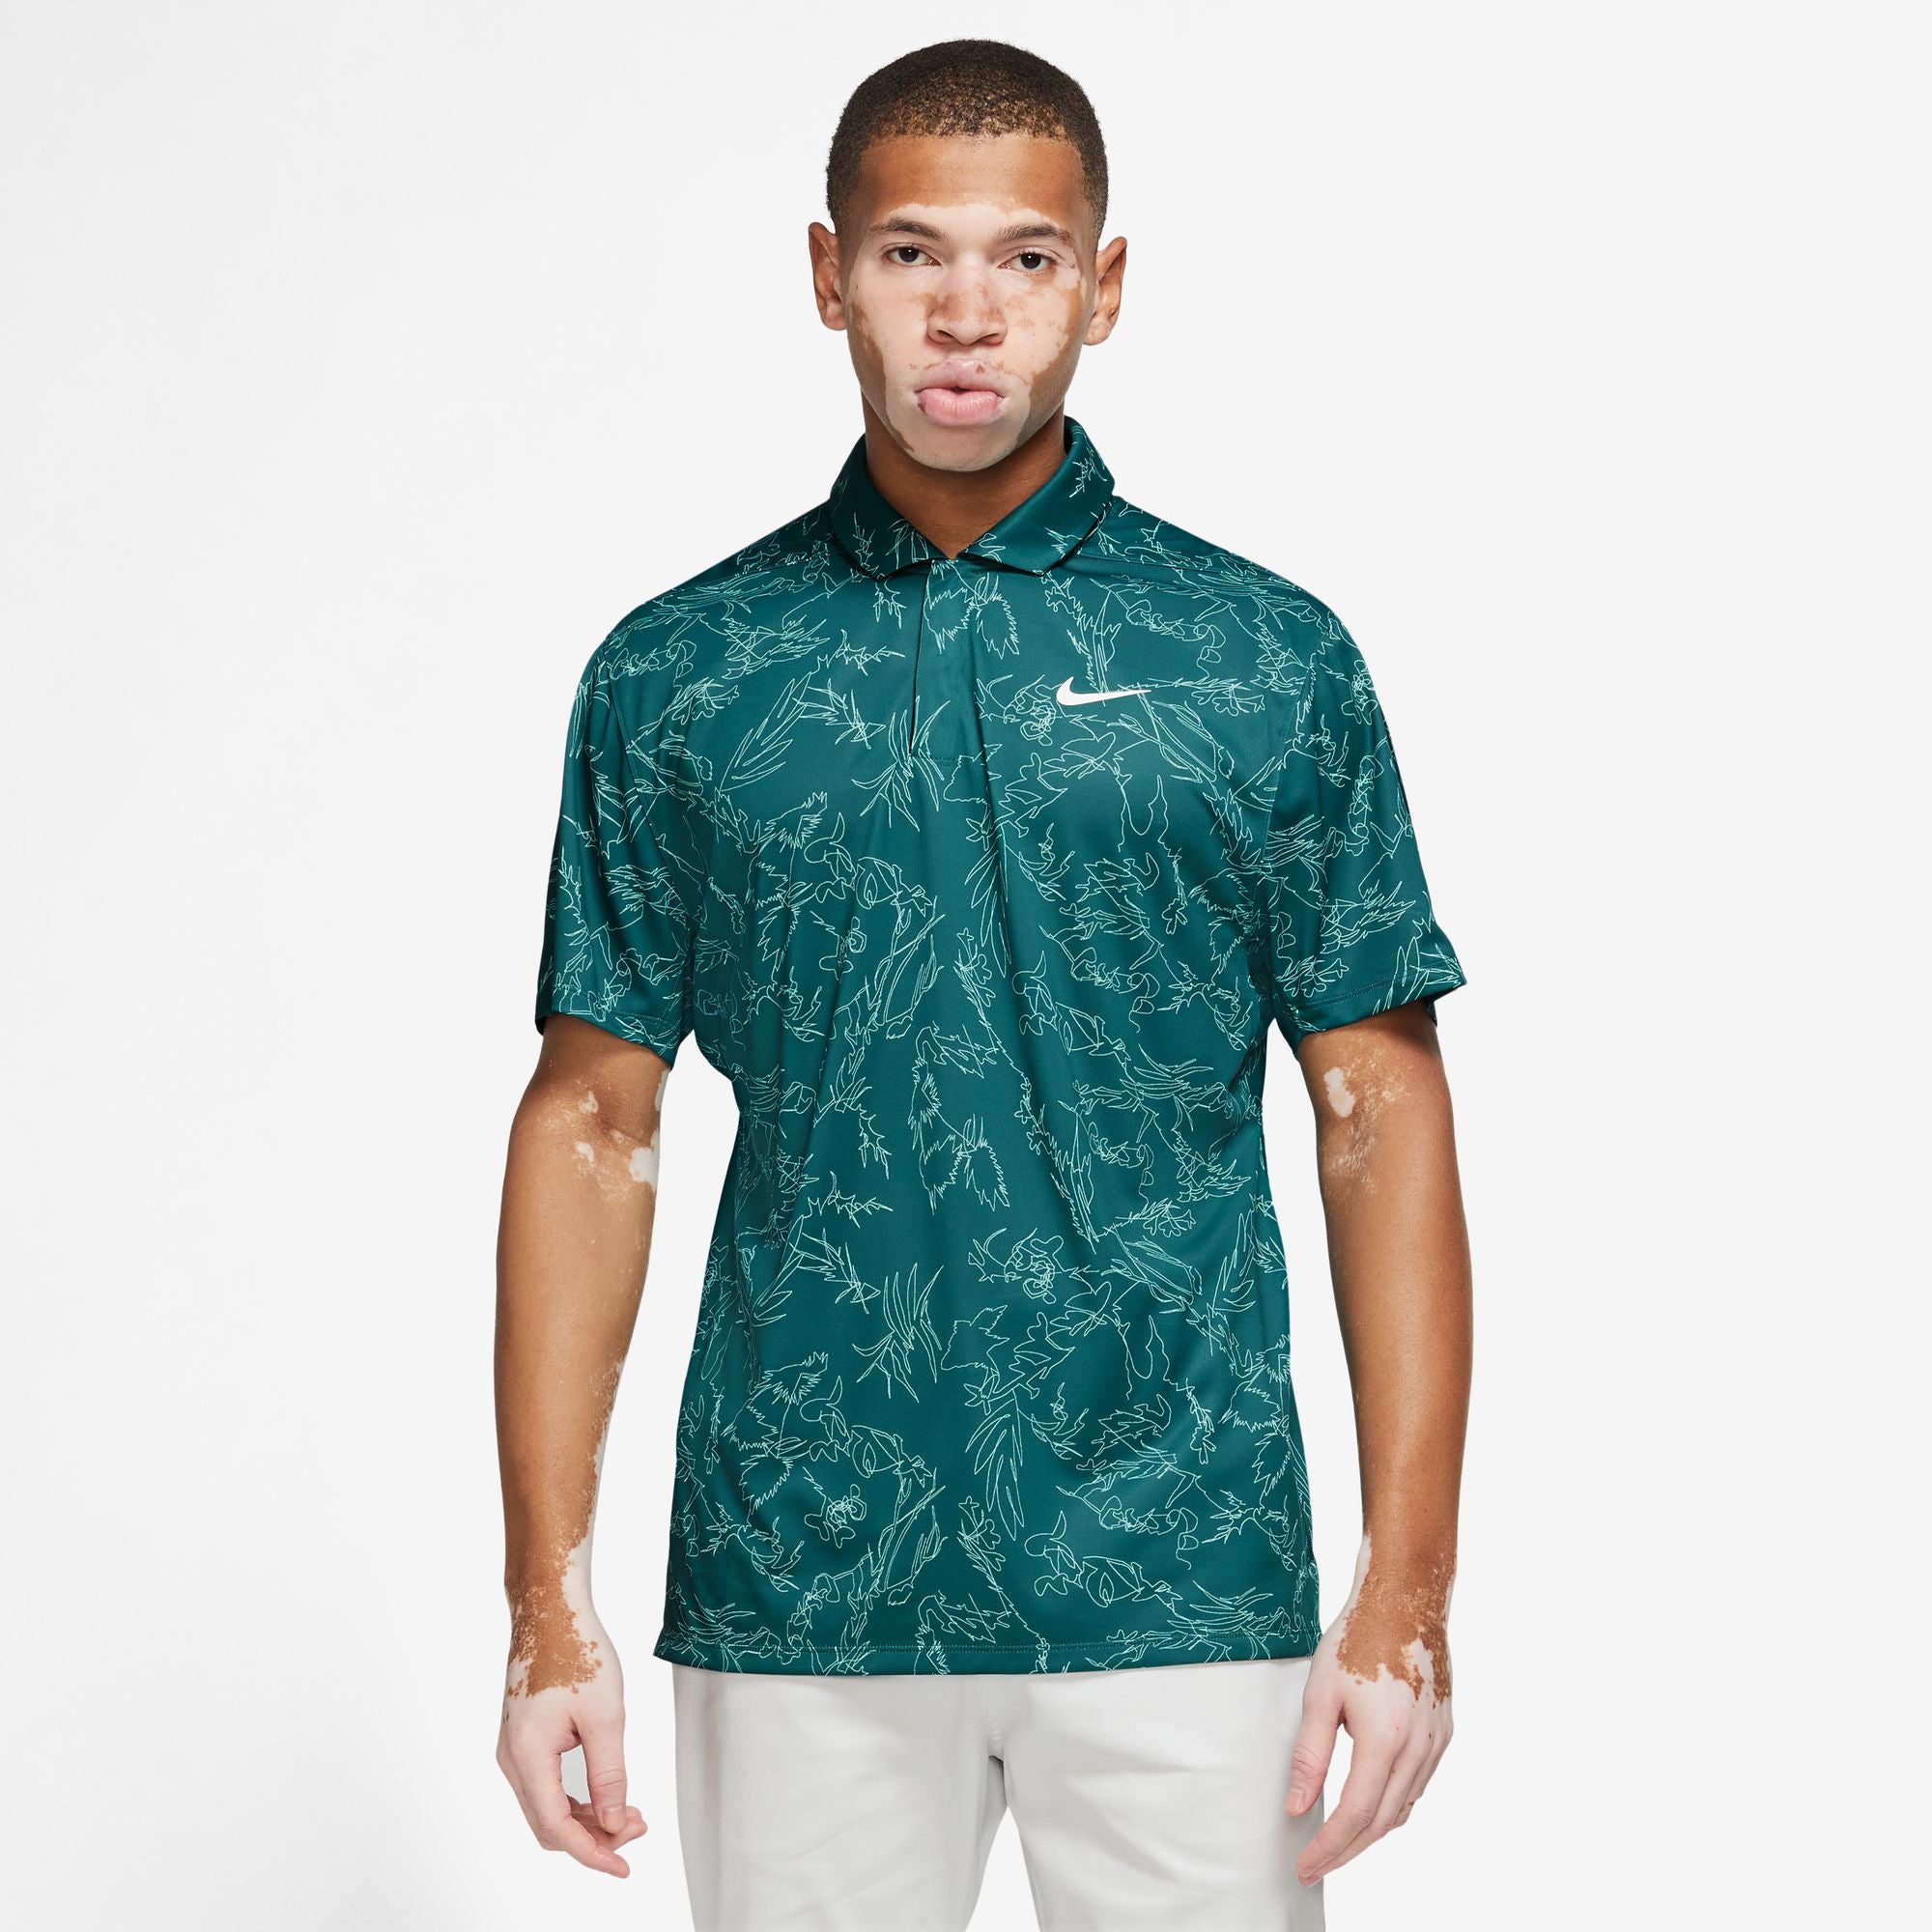 TIGER WOODS MENS NIKE DRI-FIT ADV GOLF POLO GEODE TEAL/WHITE – Park Access